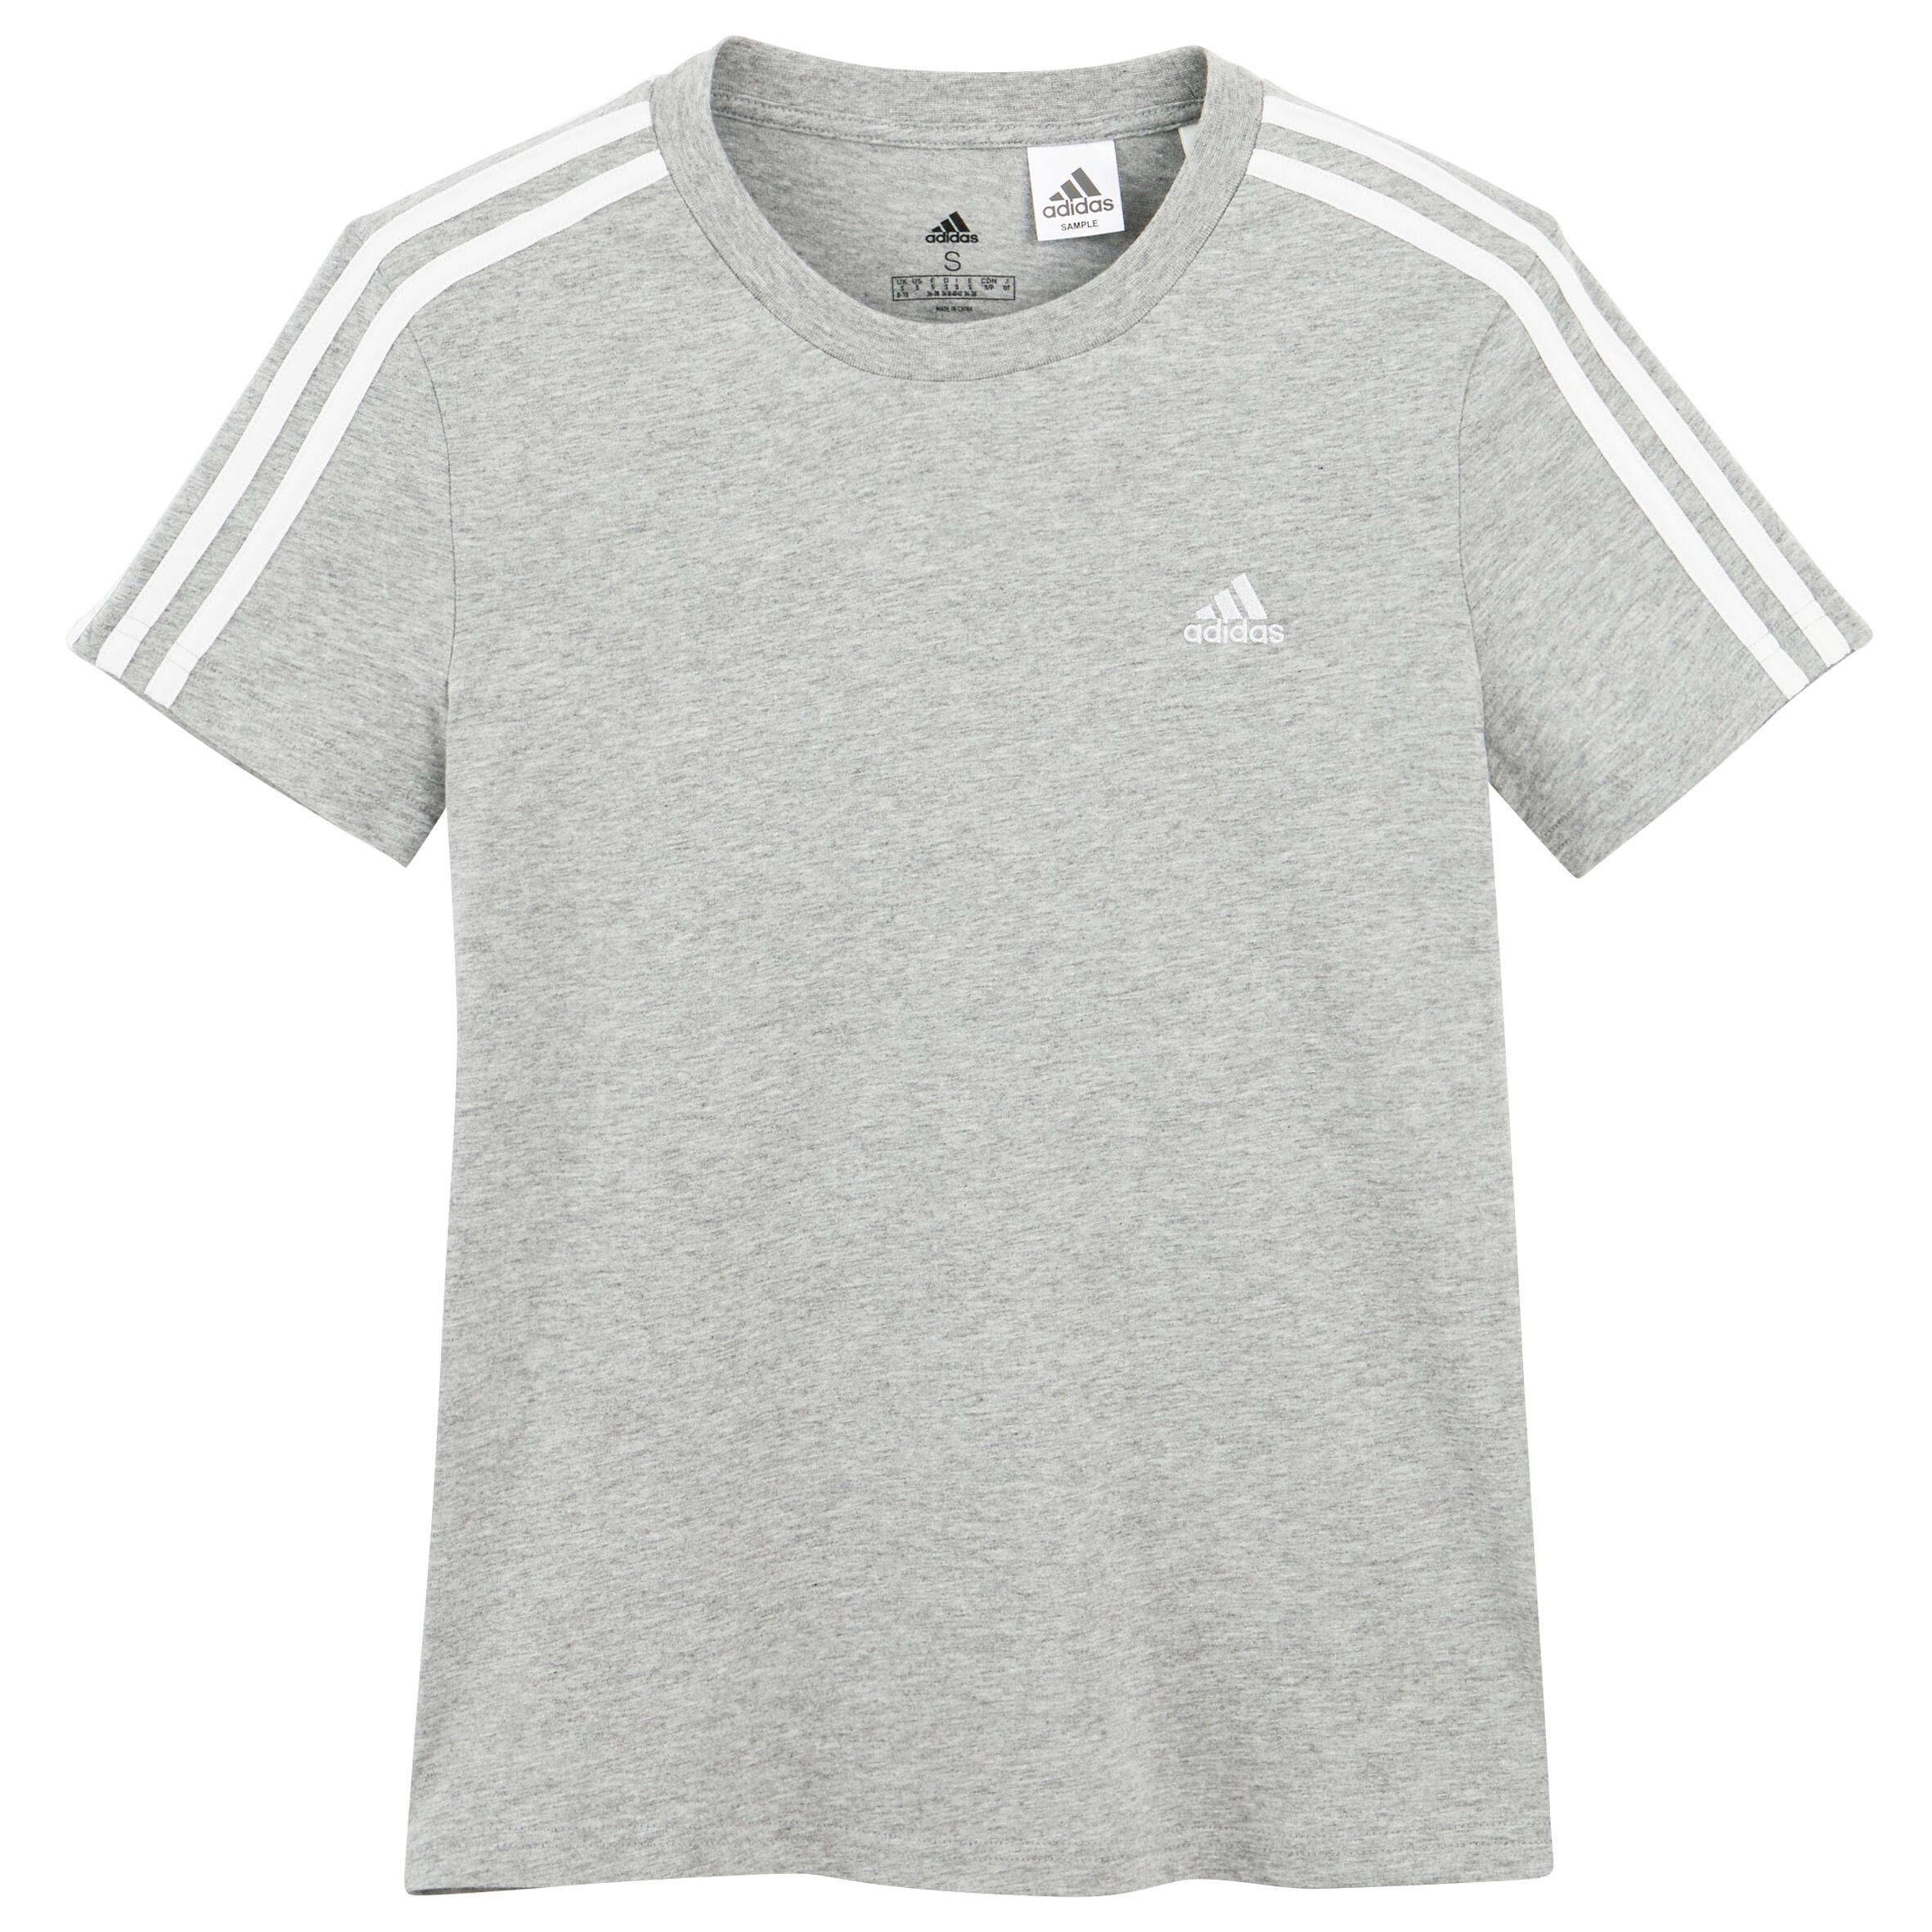 Women's Short-Sleeved Fitted Crew Neck Cotton Fitness T-Shirt 3 Stripes - Grey 5/6